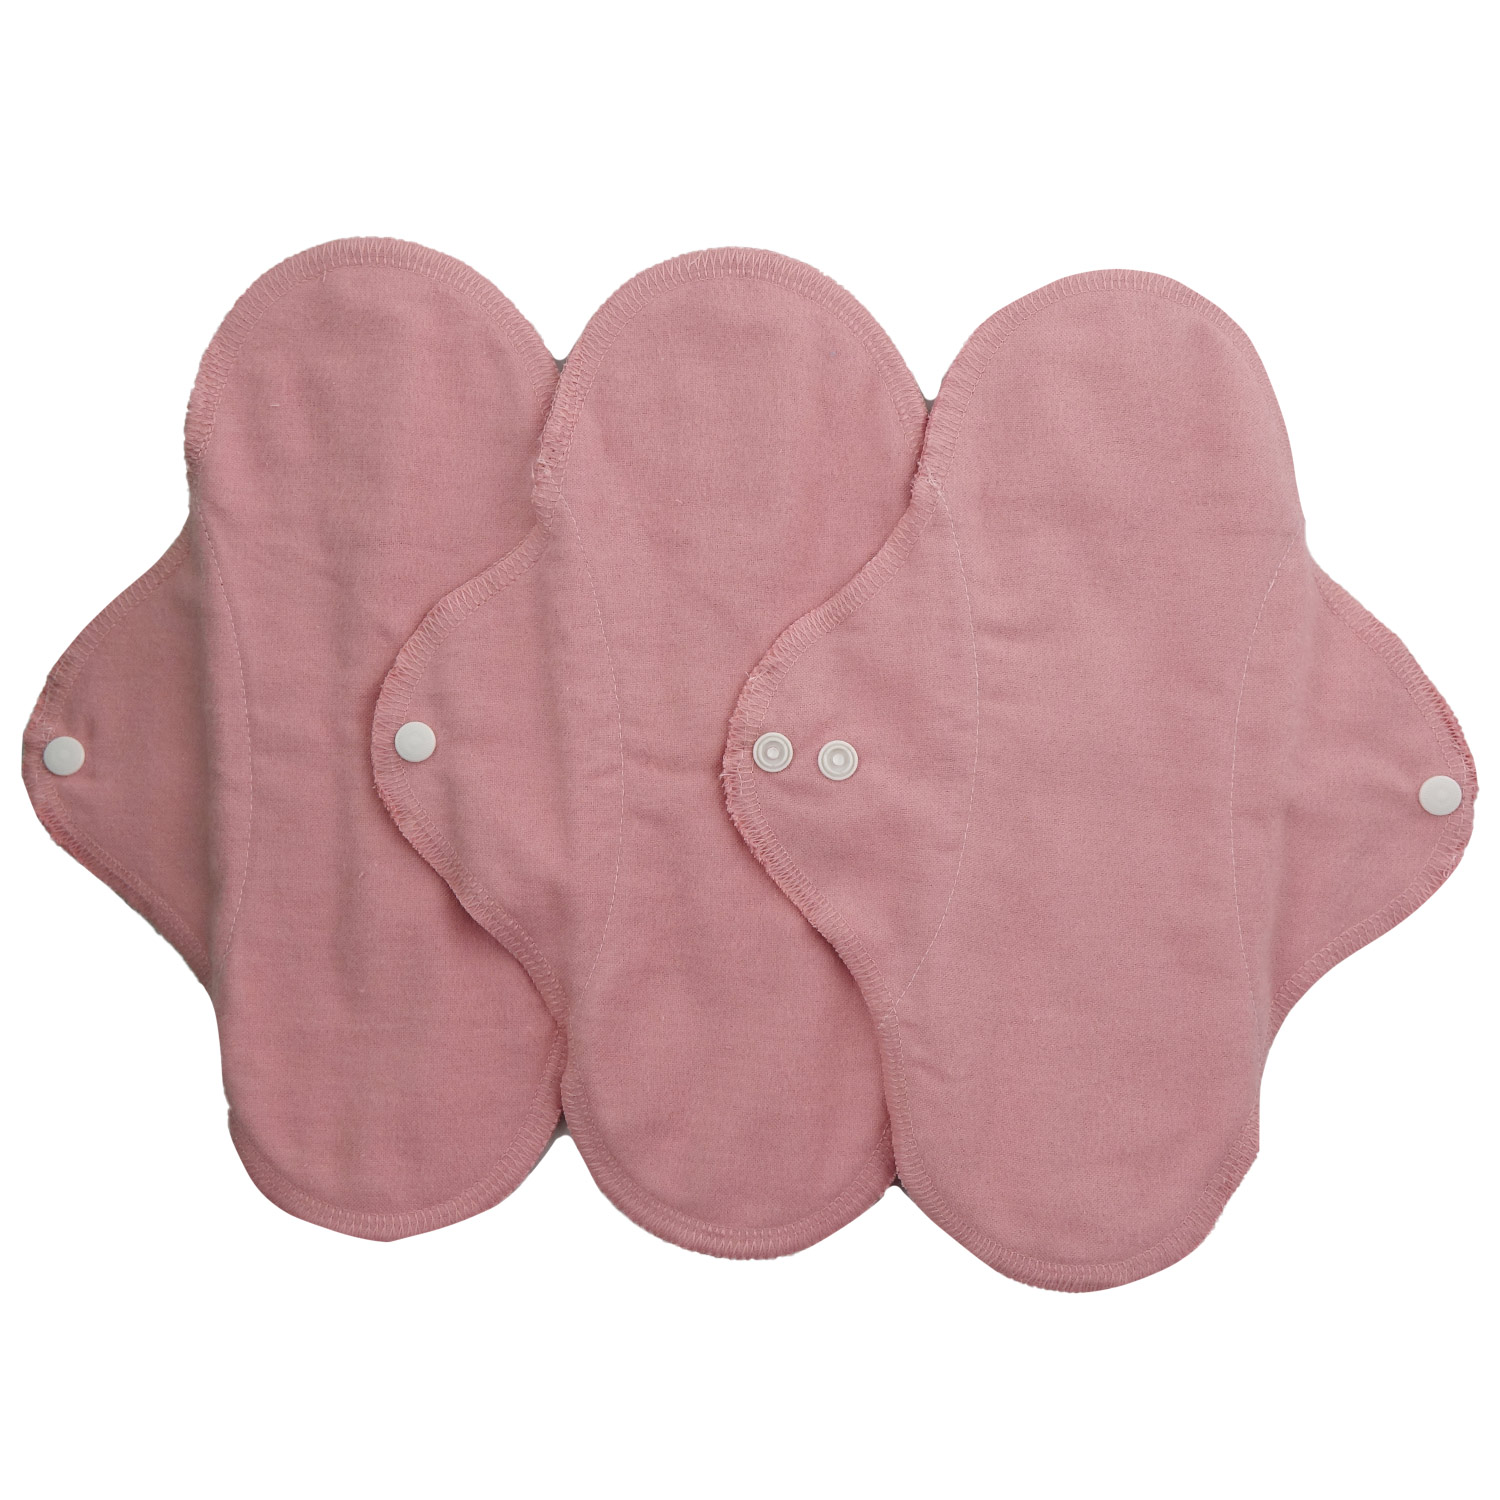 Imse Panty Liners & Cloth Pads (Classic) - 3 Pk Pattern: Blossom Solid / Size: Regular)